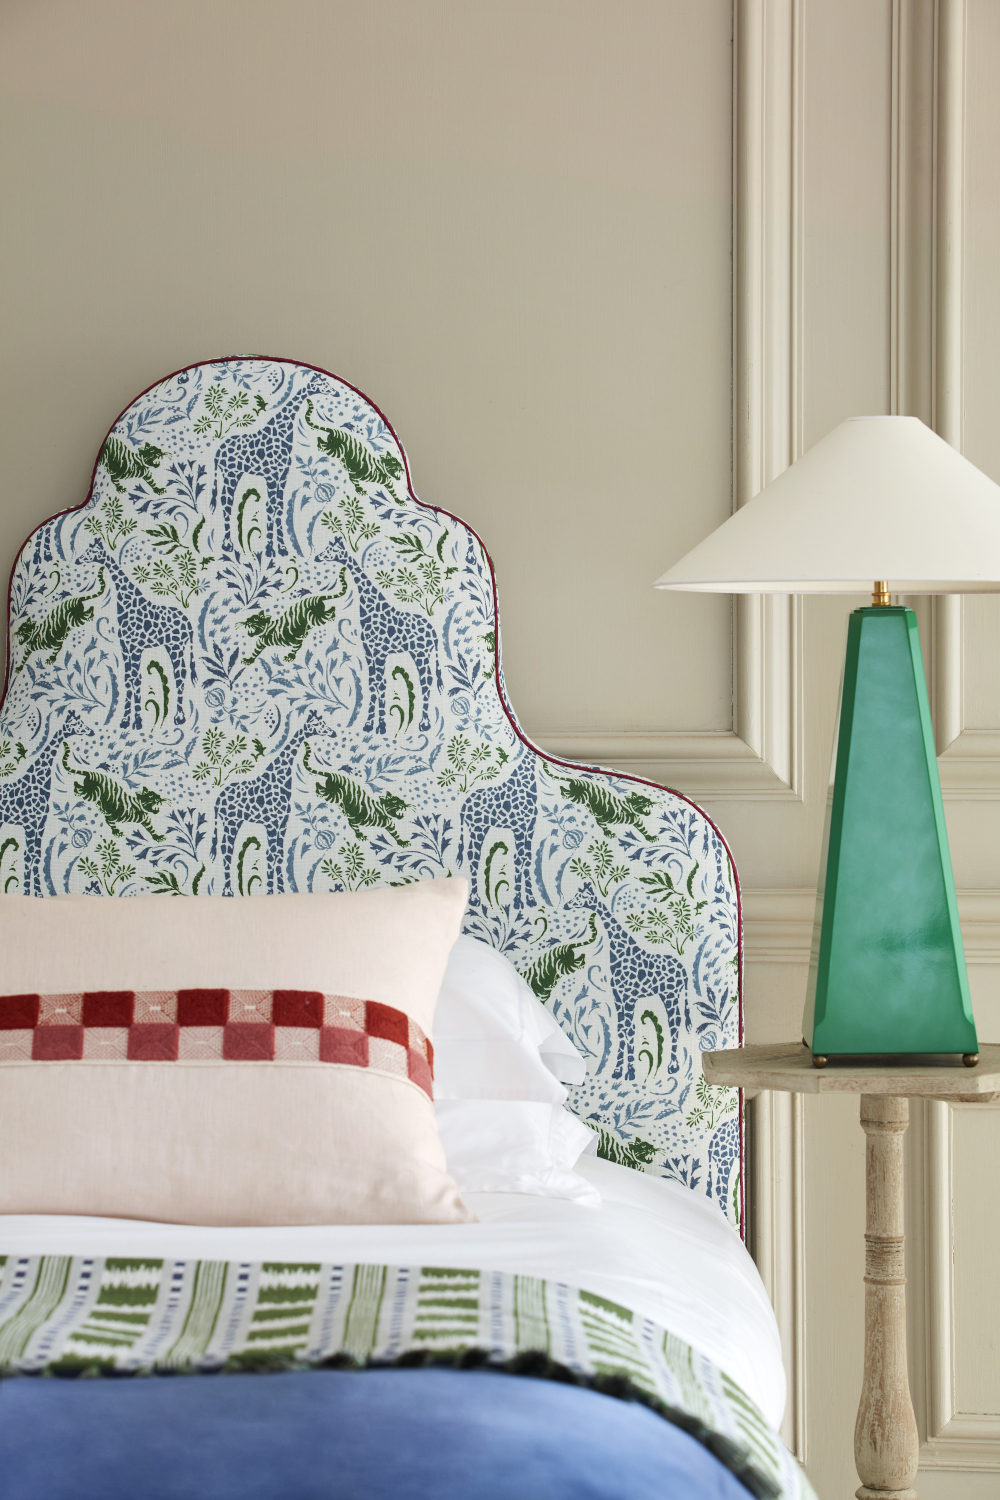 Image of upholstered bed frame with green lamp on bedside table